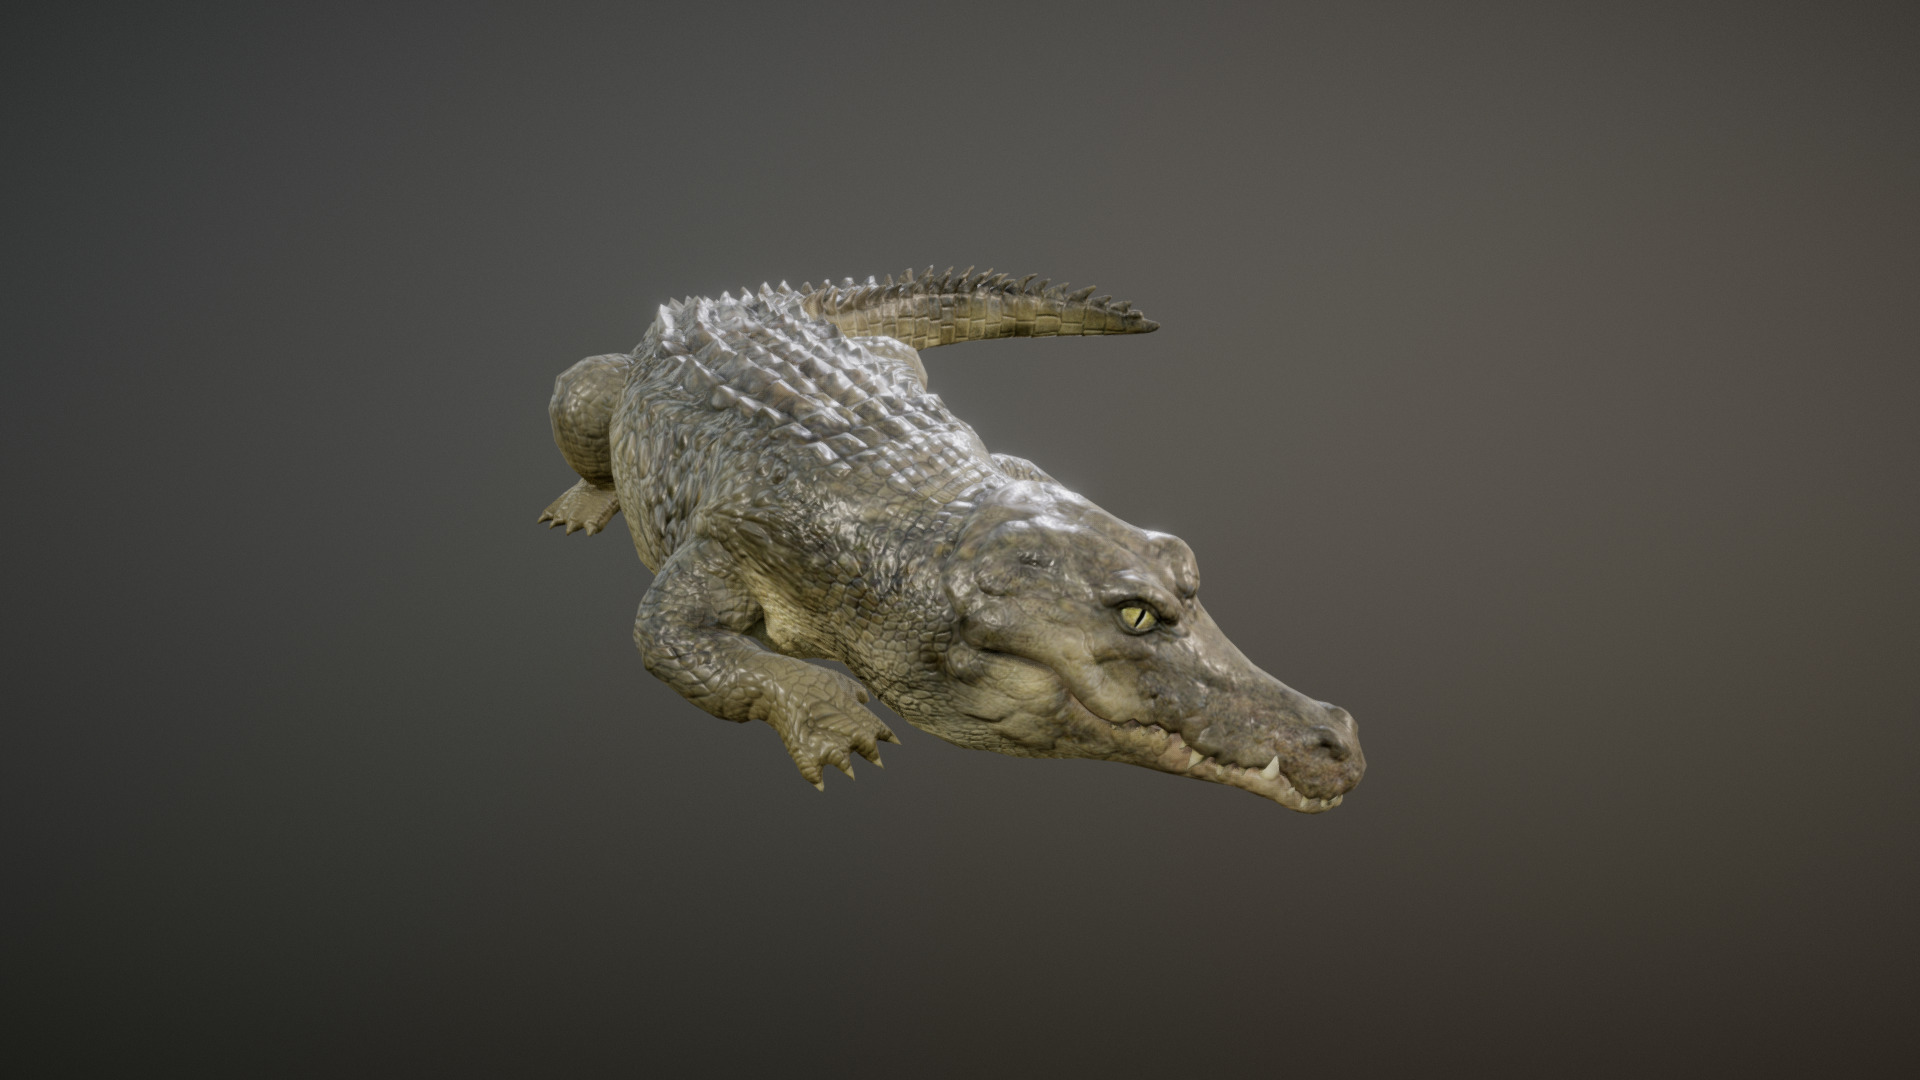 3D model CROCODILE ANIMATIONS - This is a 3D model of the CROCODILE ANIMATIONS. The 3D model is about a small lizard on a black background.